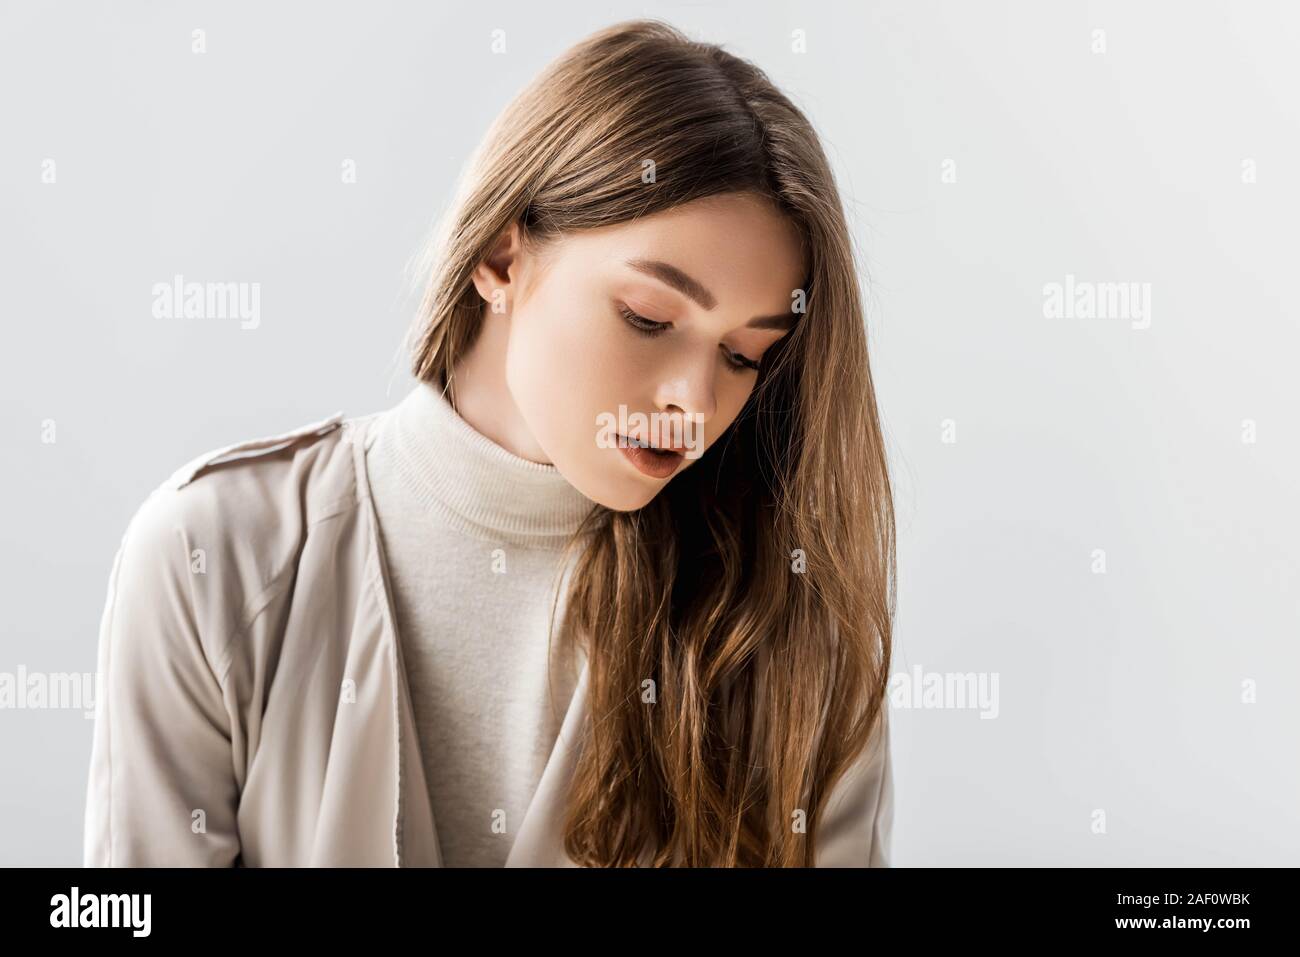 dreamy, stylish woman looking down isolated on grey Stock Photo